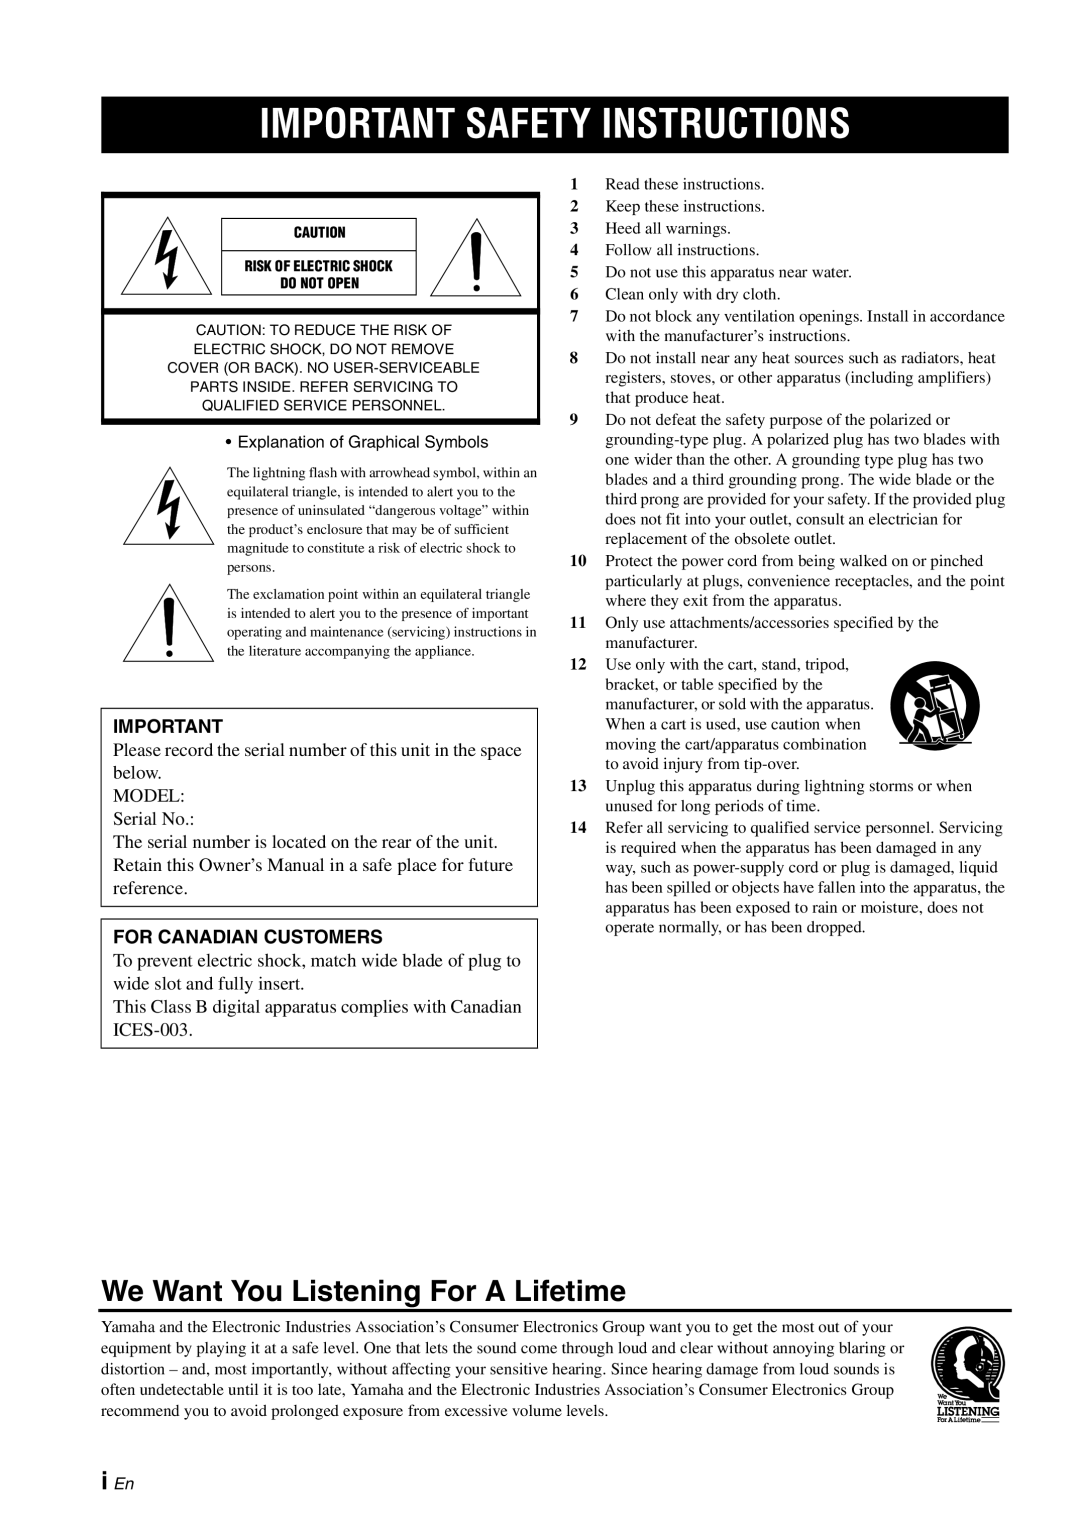 Yamaha A-S1000 owner manual Important Safety Instructions, We Want You Listening For A Lifetime, i En 